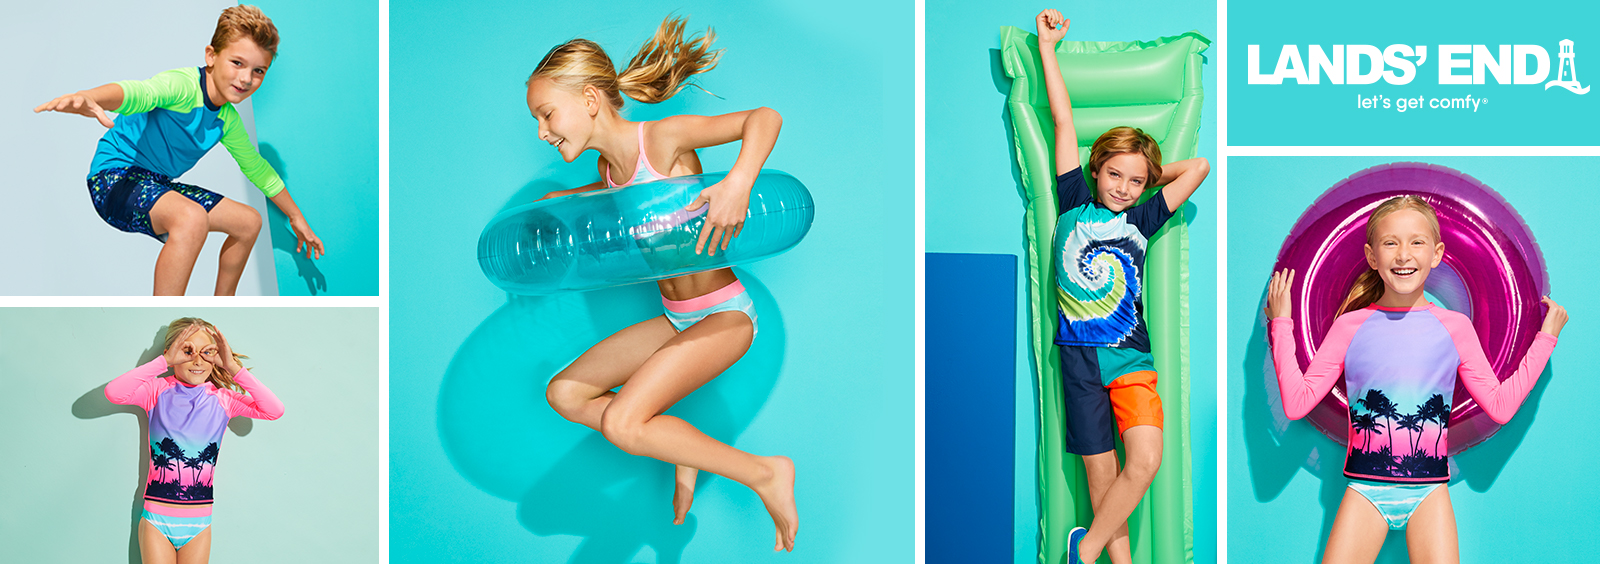 Best Quality Swimwear Items Your Kids Will Love in 2021